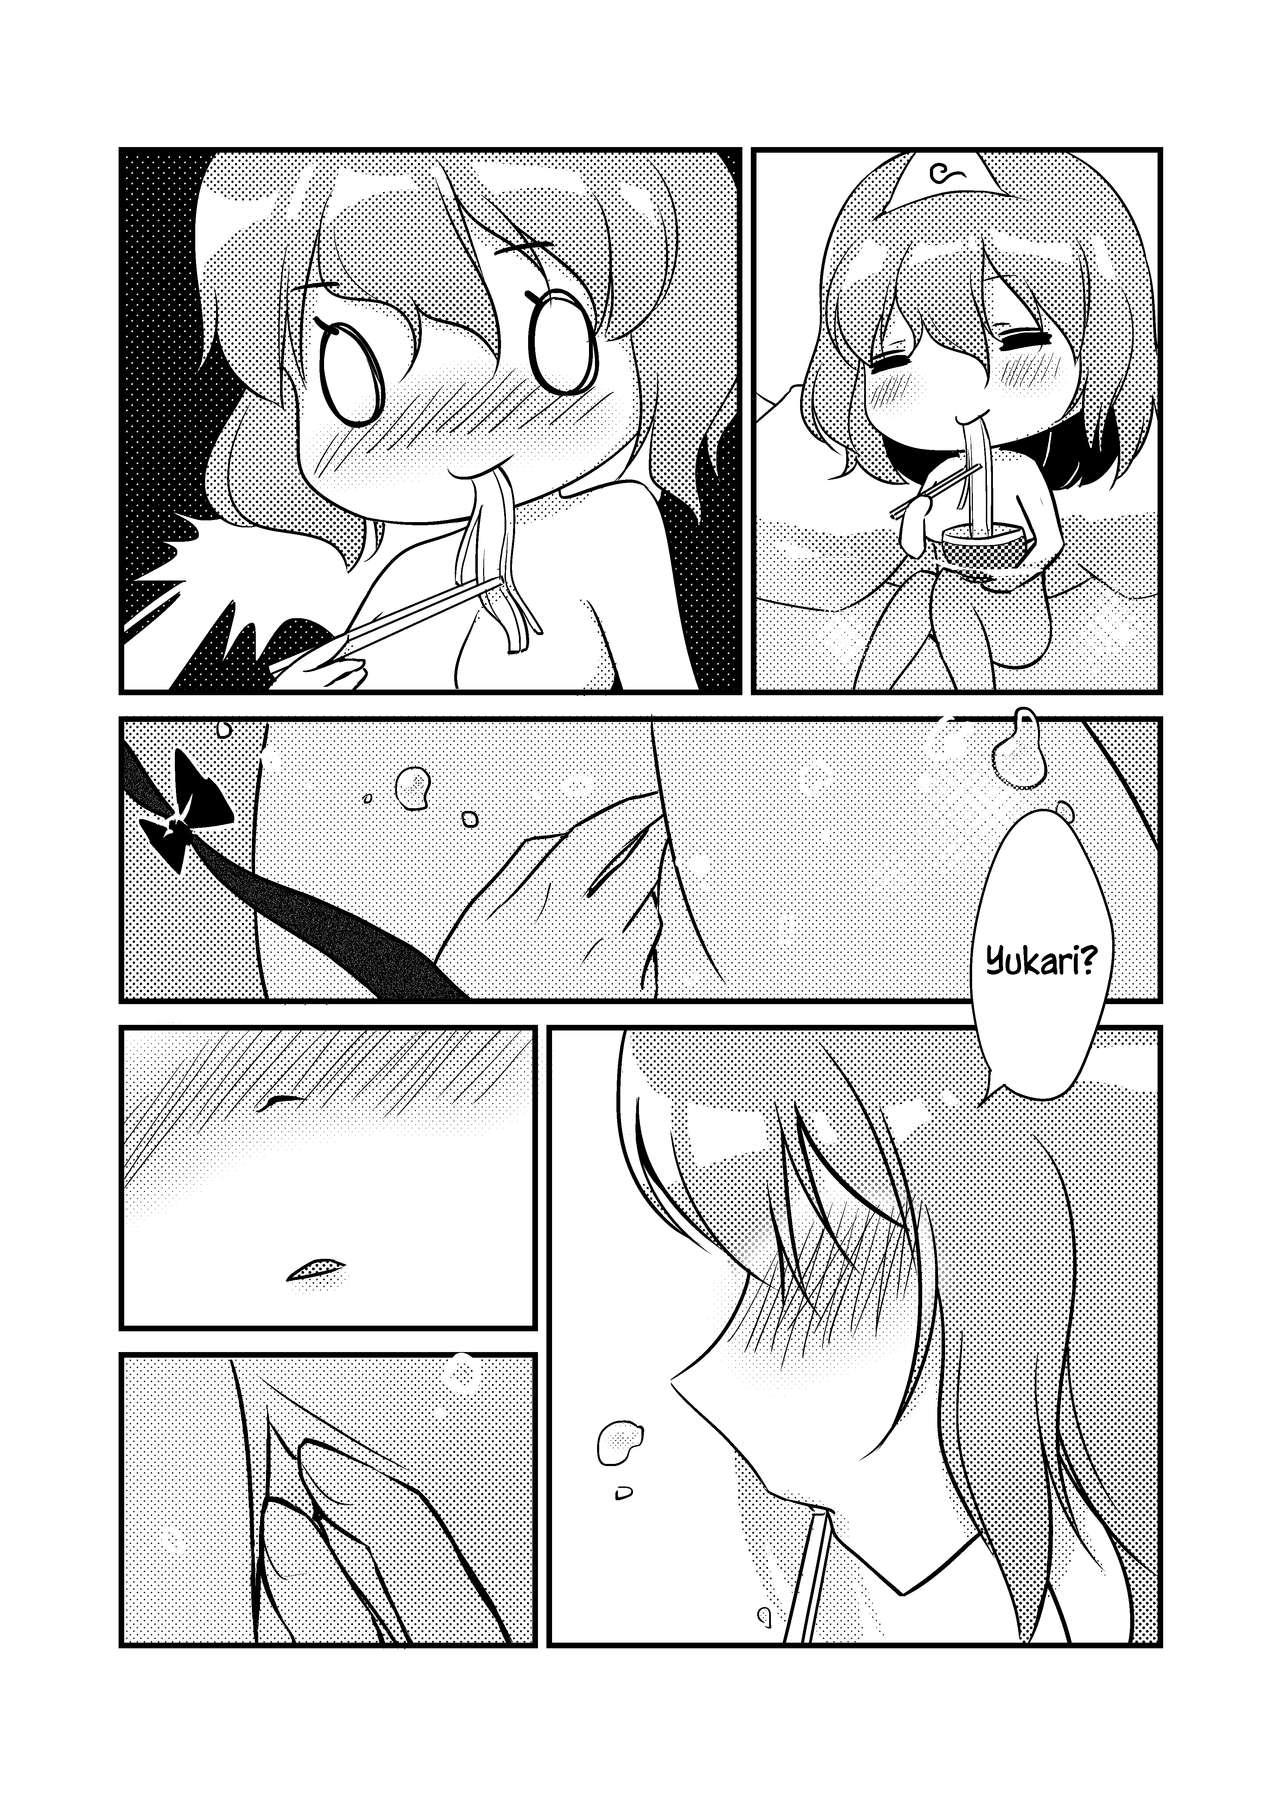 Teenager ????一起泡温泉吧！ | ????Let's Soak in the Hot Spring! - Touhou project 8teen - Page 5